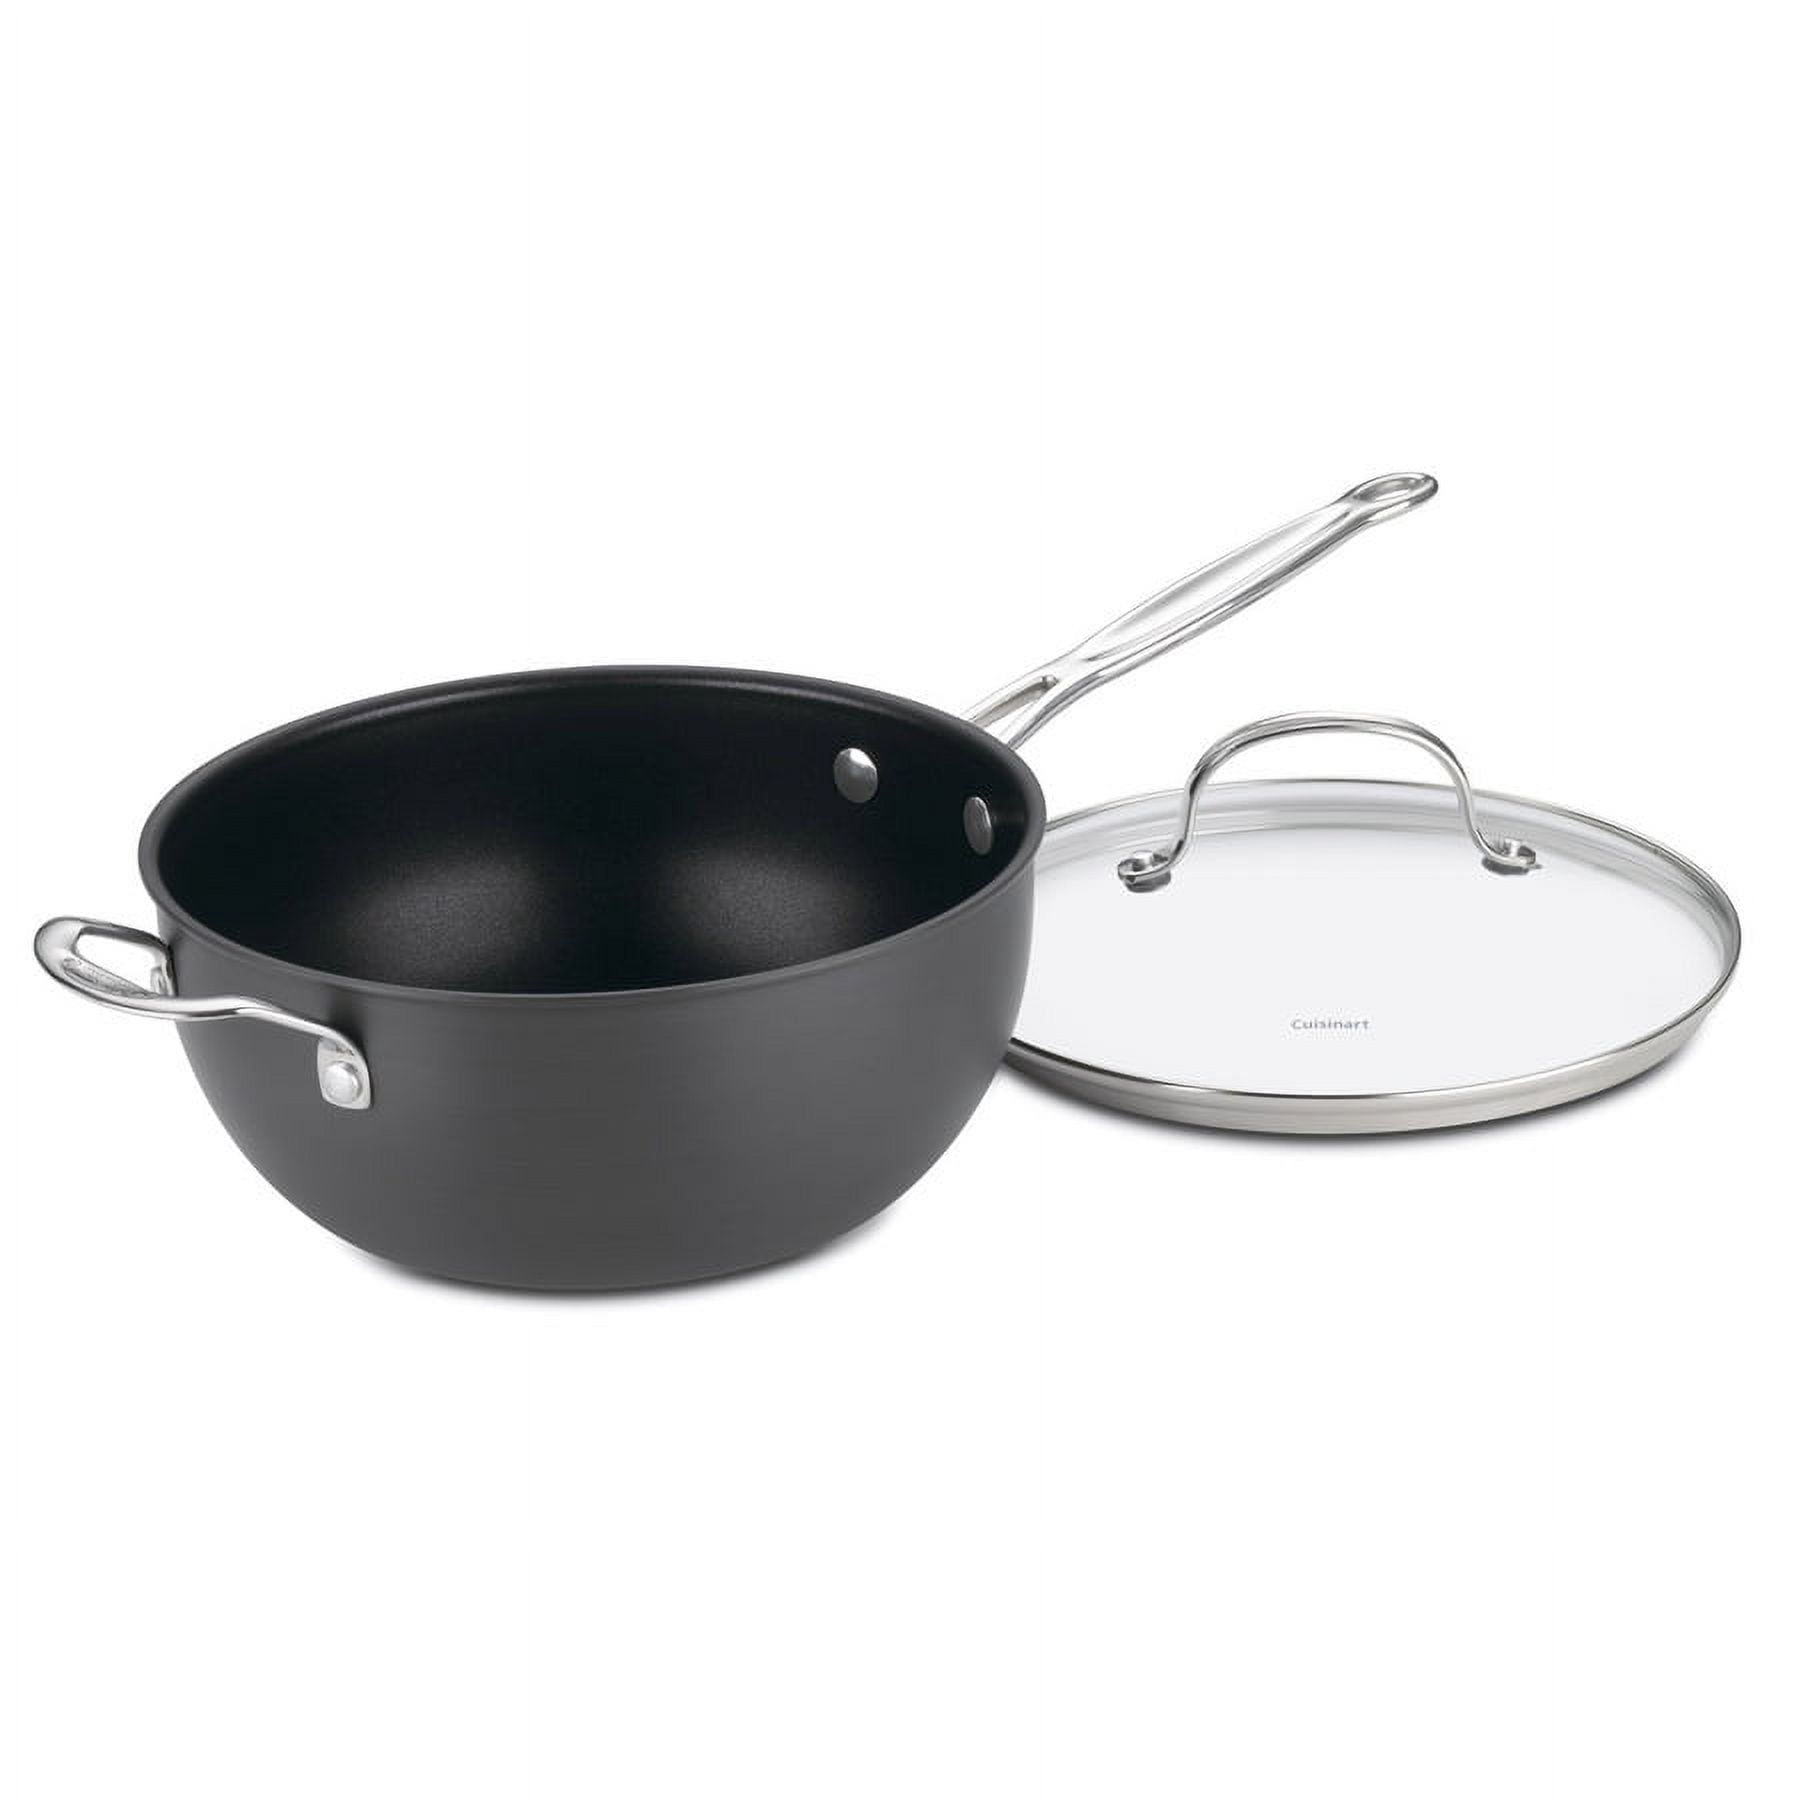 Wellfor Non-Stick HexClad Hybrid Technology Frying Pan 2-Piece Set